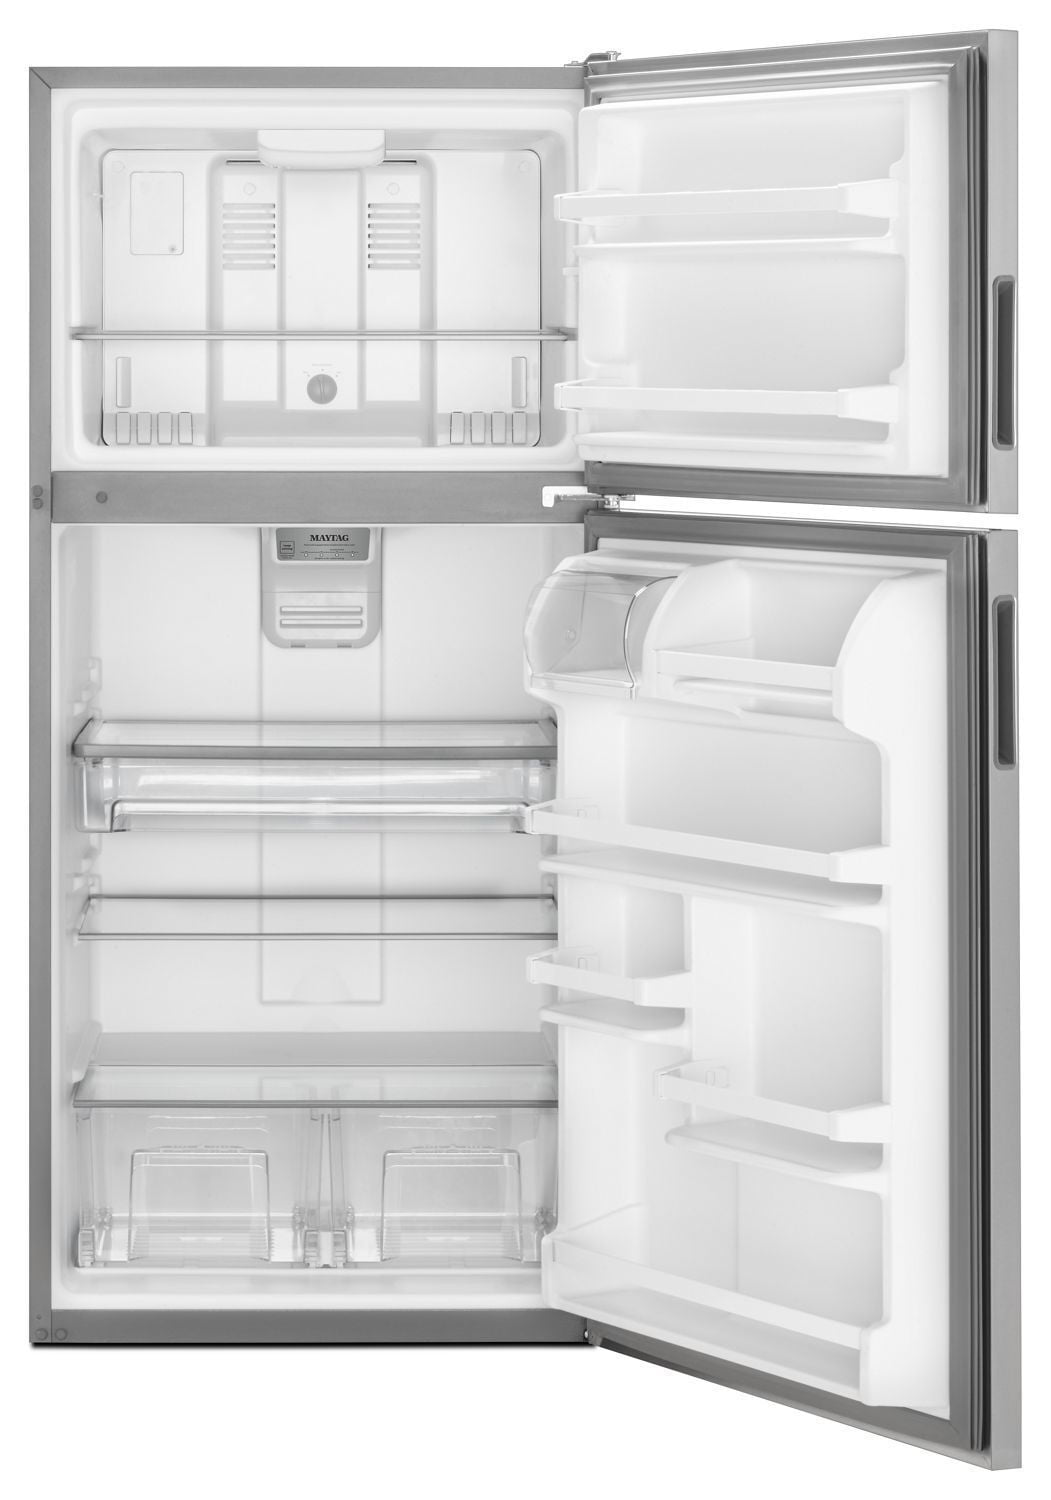 Maytag MRT118FFFM 30-Inch Wide Top Freezer Refrigerator With Powercold® Feature- 18 Cu. Ft. Monochromatic Stainless Steel